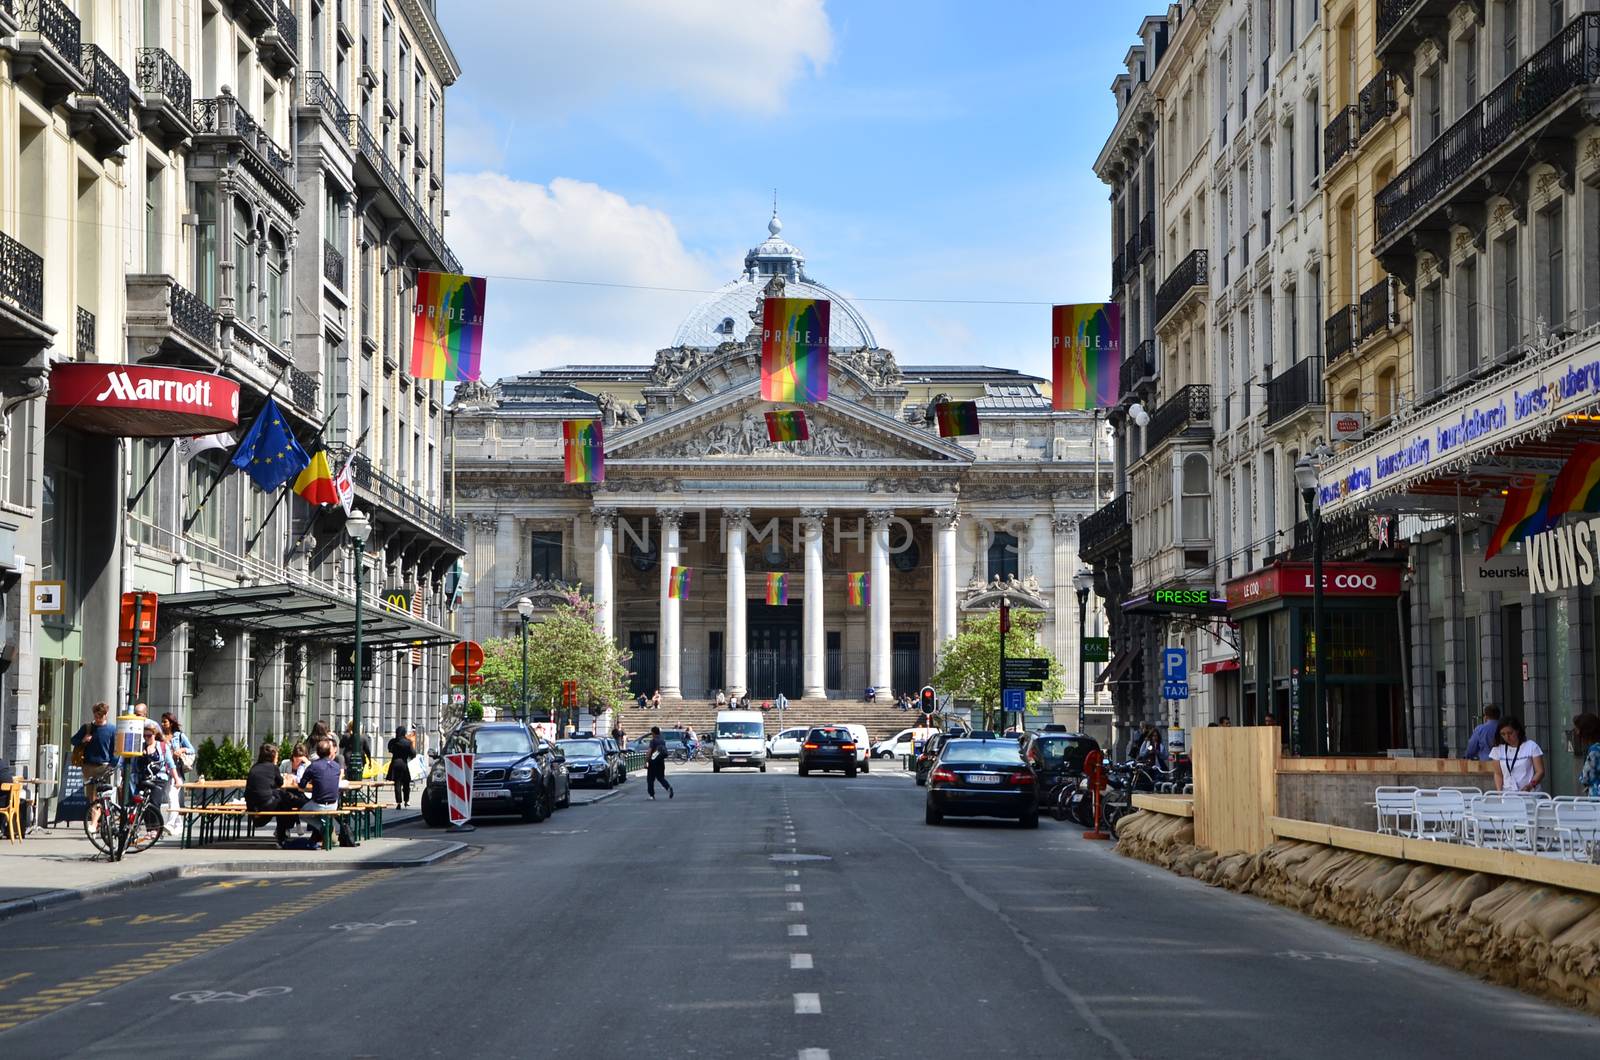 Brussels, Belgium - May 12, 2015: Peoples at Brussels Stock Exchange on May 12, 2015. The building was founded in Brussels, Belgium, by decree of Napoleon in 1801.